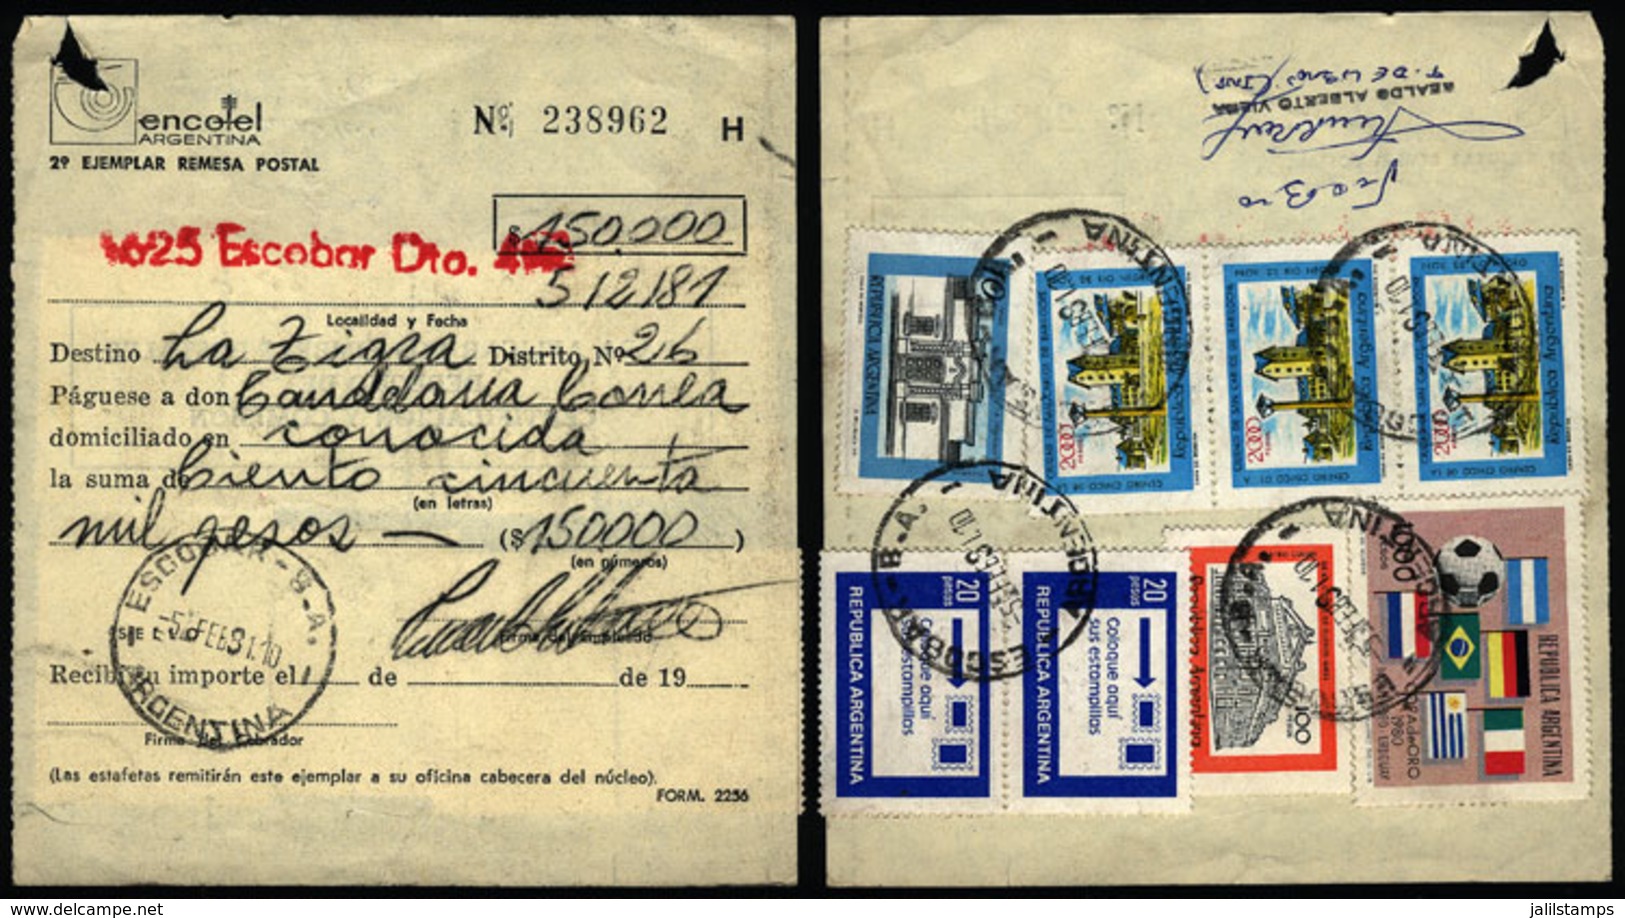 ARGENTINA: Postal Money Order Sent On 5/FE/1981 With Postmark Of "ESCOBAR" To La Trigra, With INFLA Postage Of $7,150." - Storia Postale